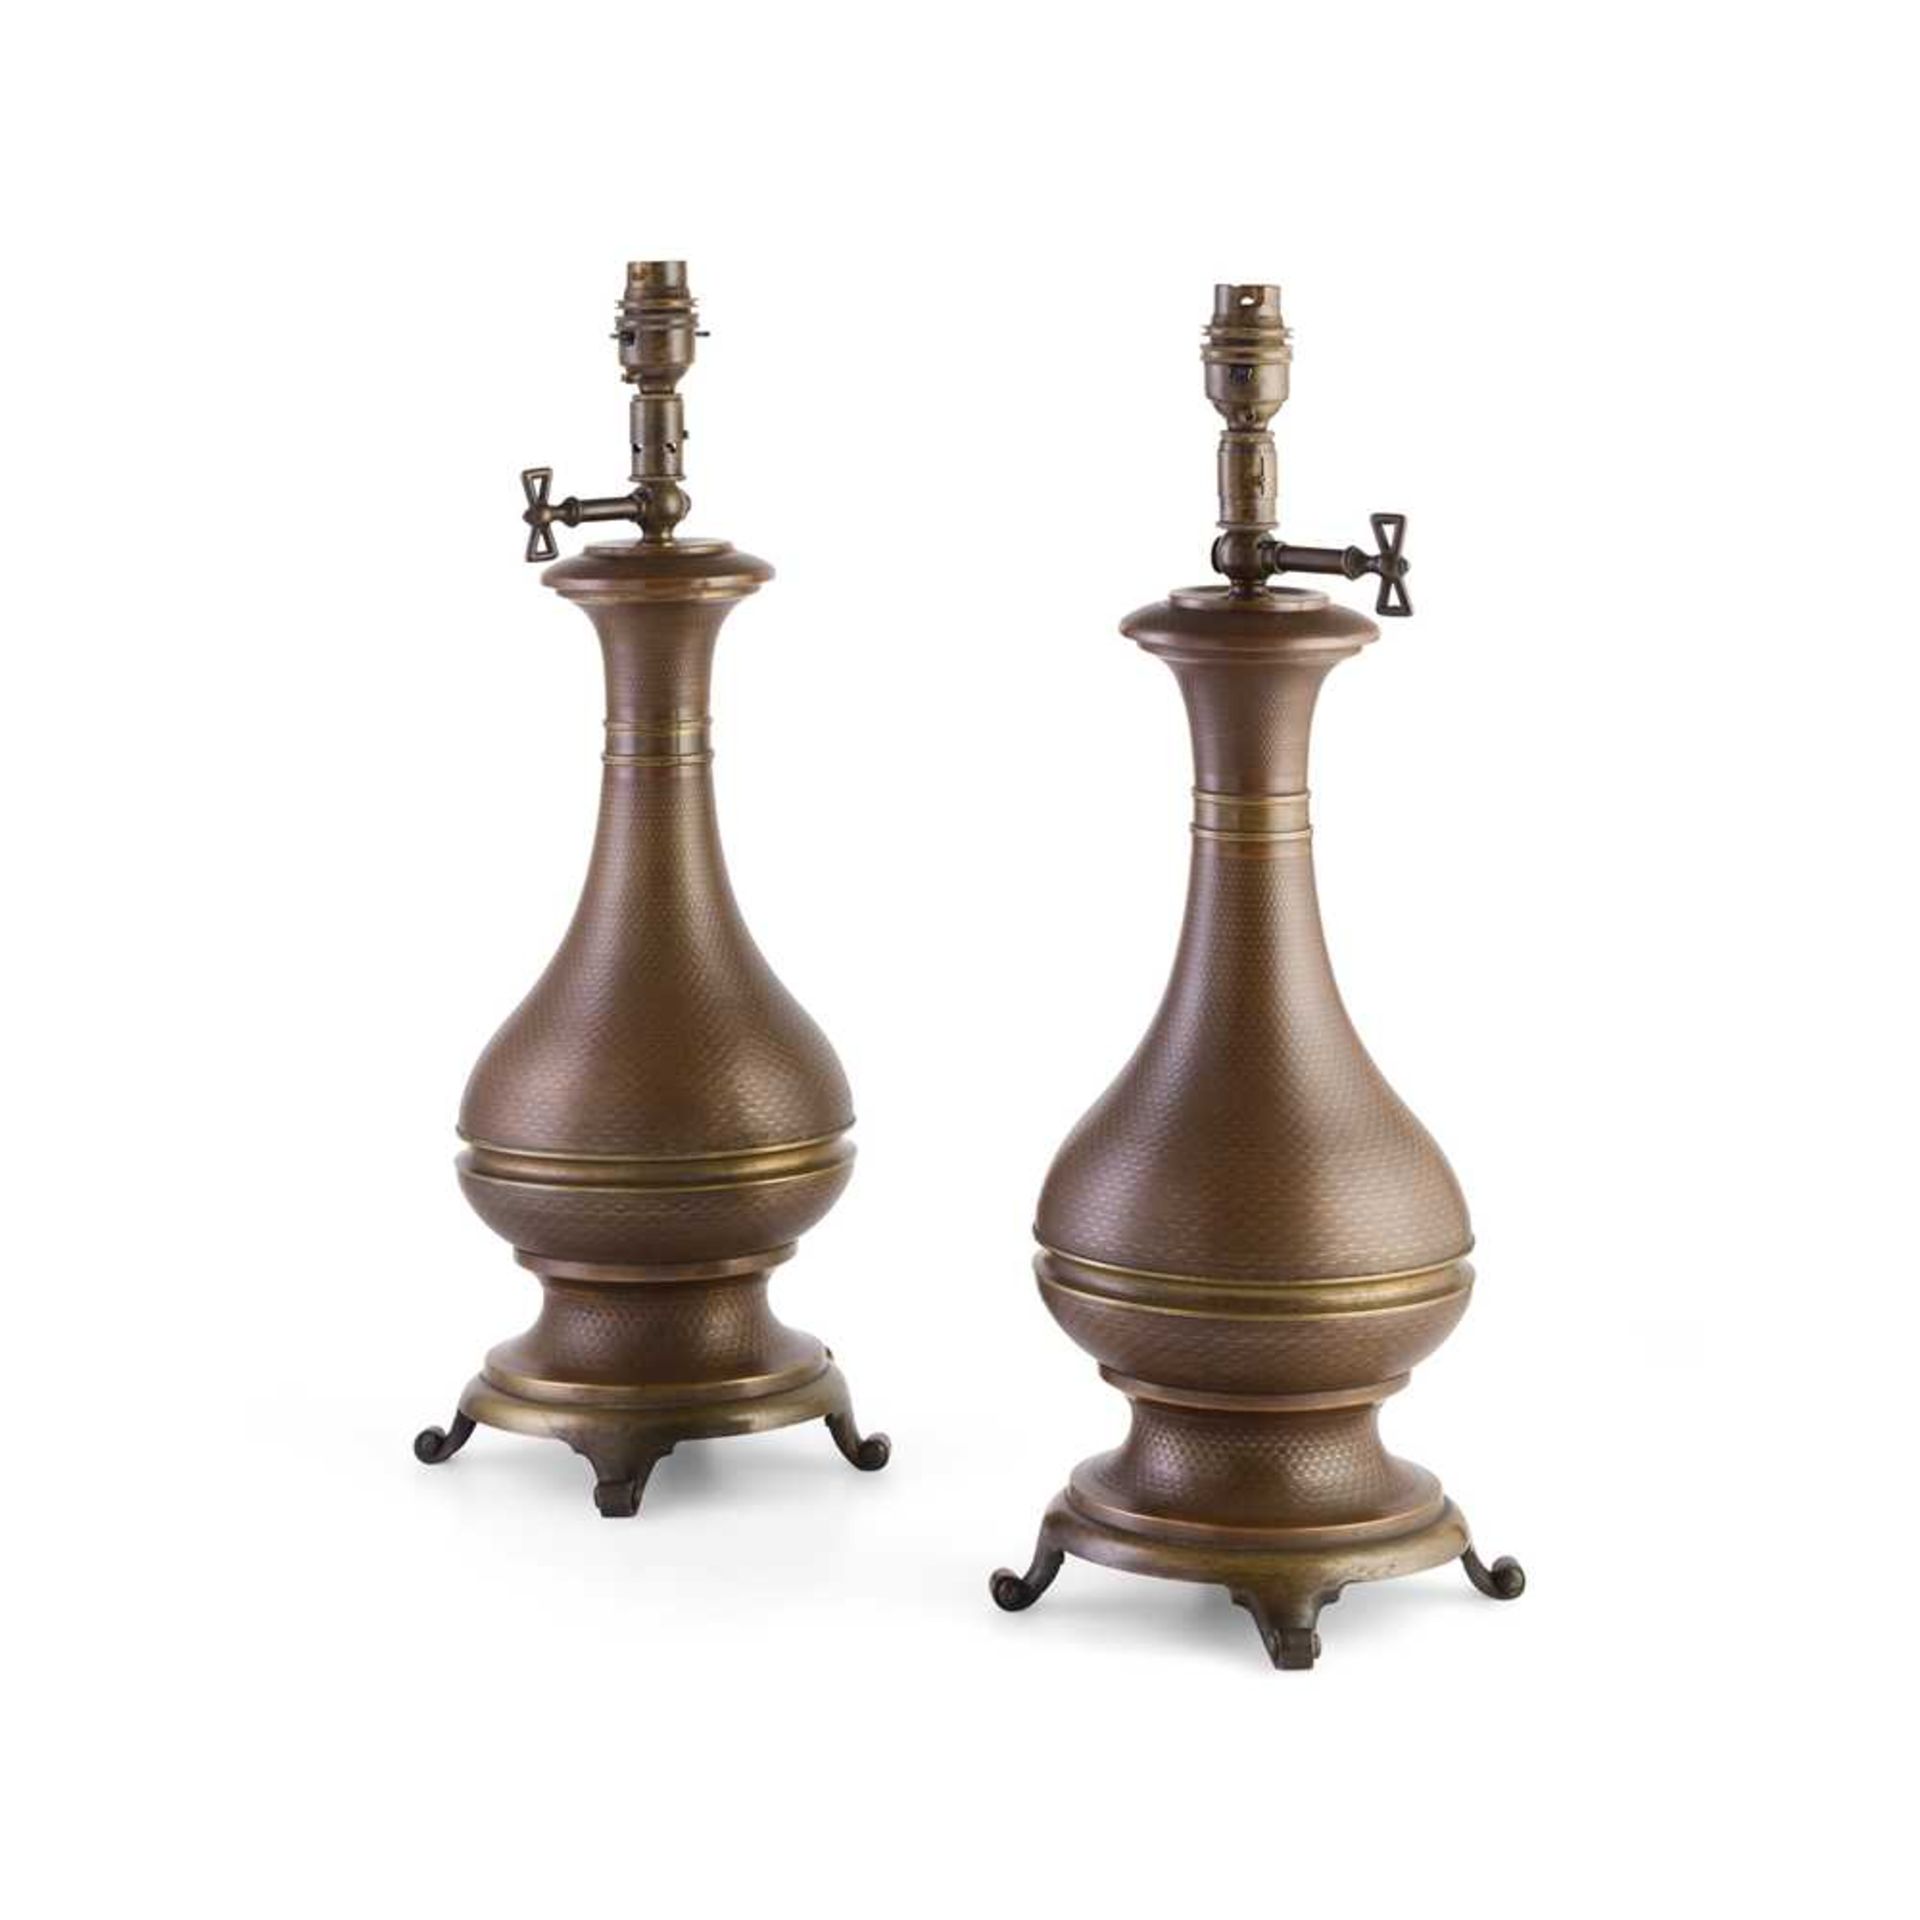 PAIR OF FRENCH BRONZE MODERATOR LAMPS 19TH CENTURY - Image 2 of 2